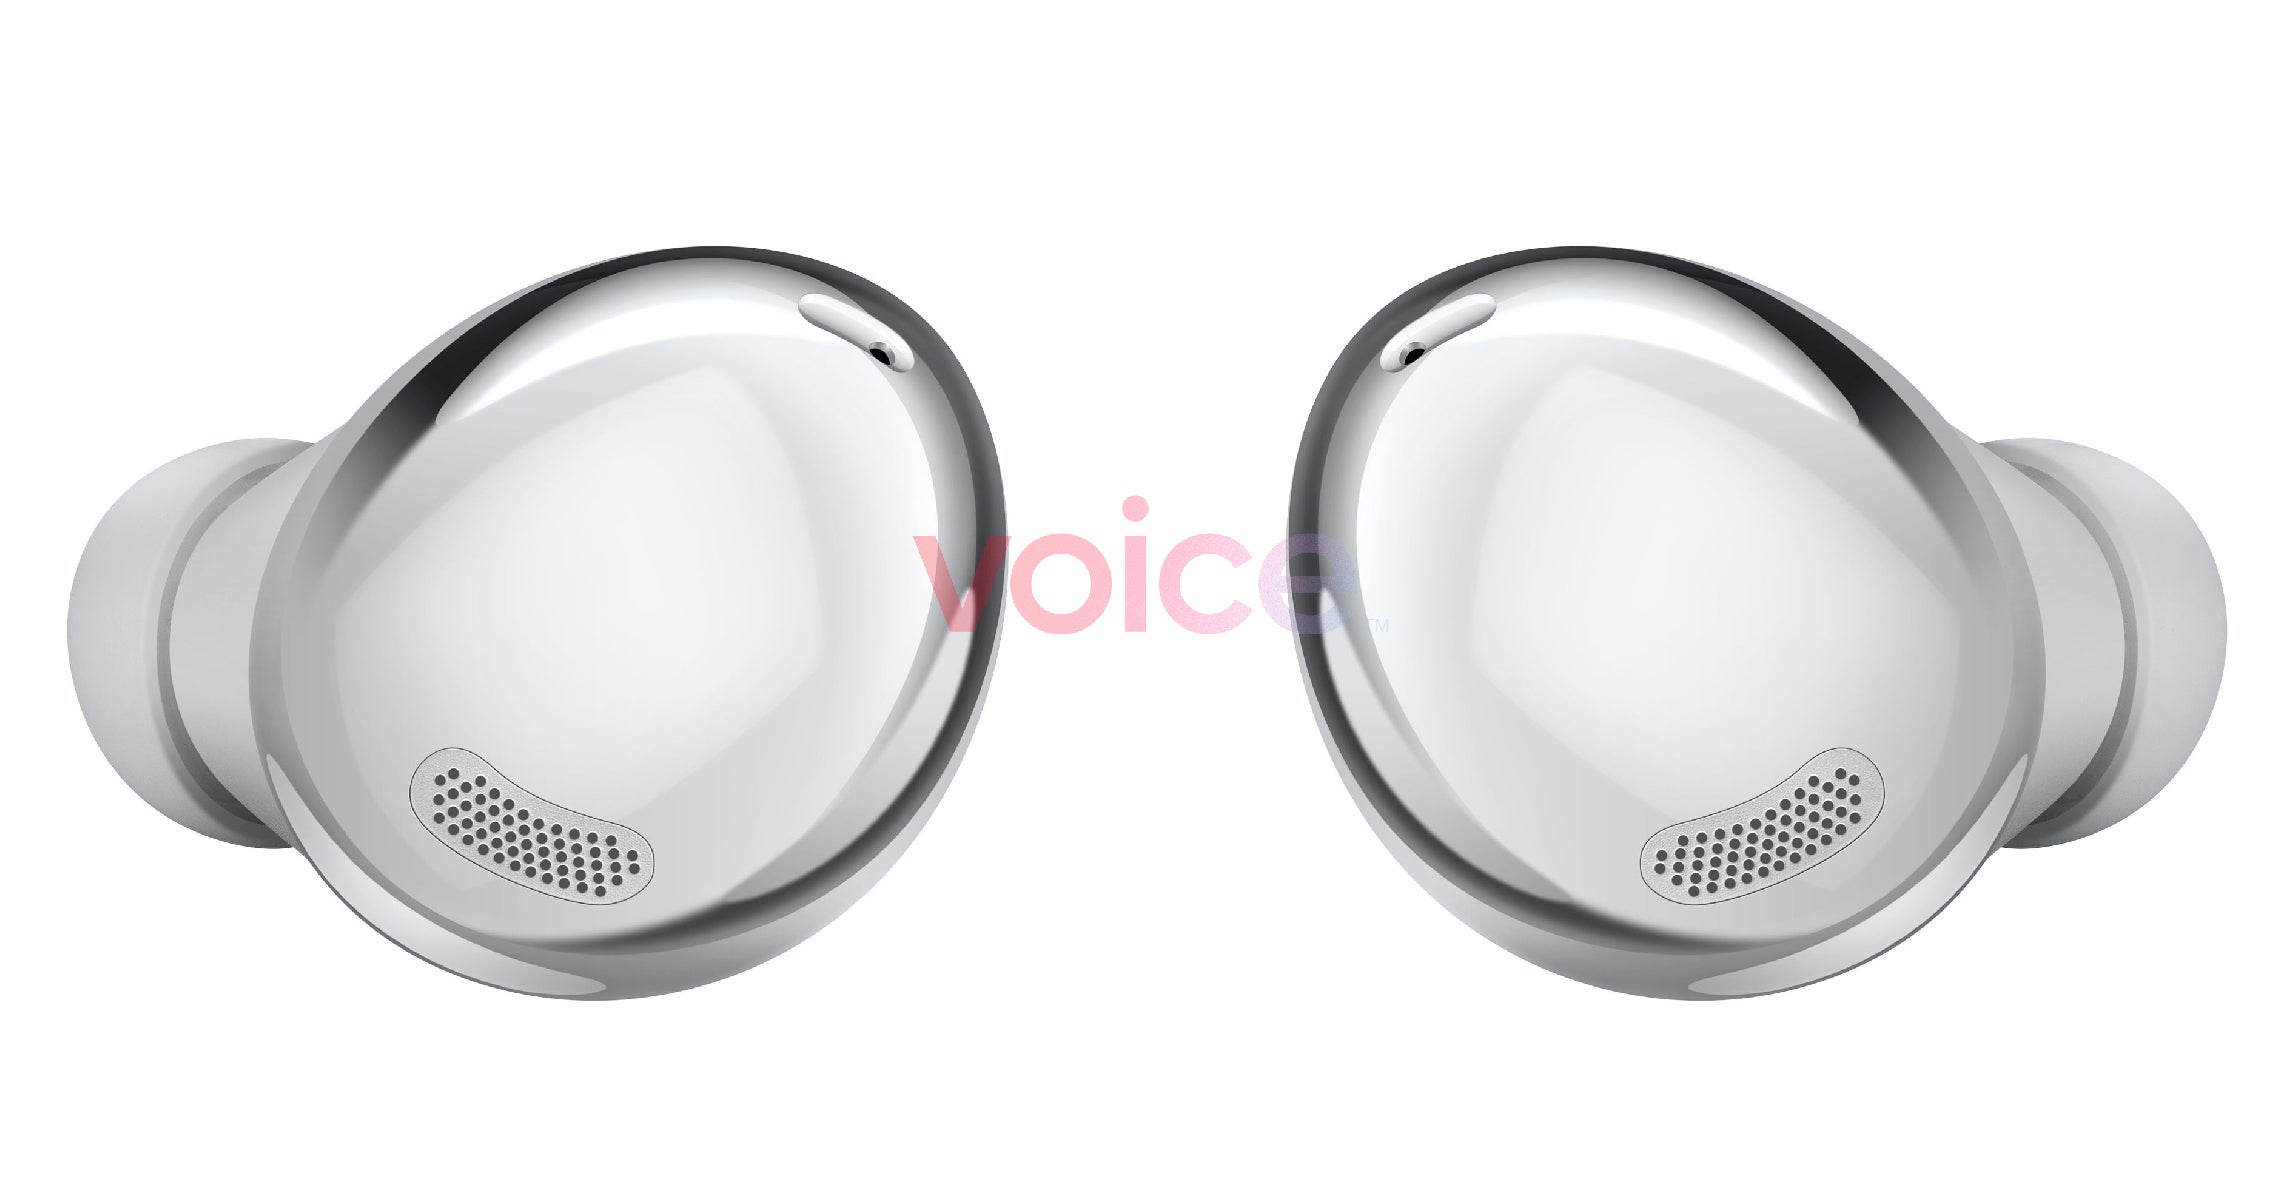 The Galaxy Buds Pro will reportedly come in silver, violet, and other colors